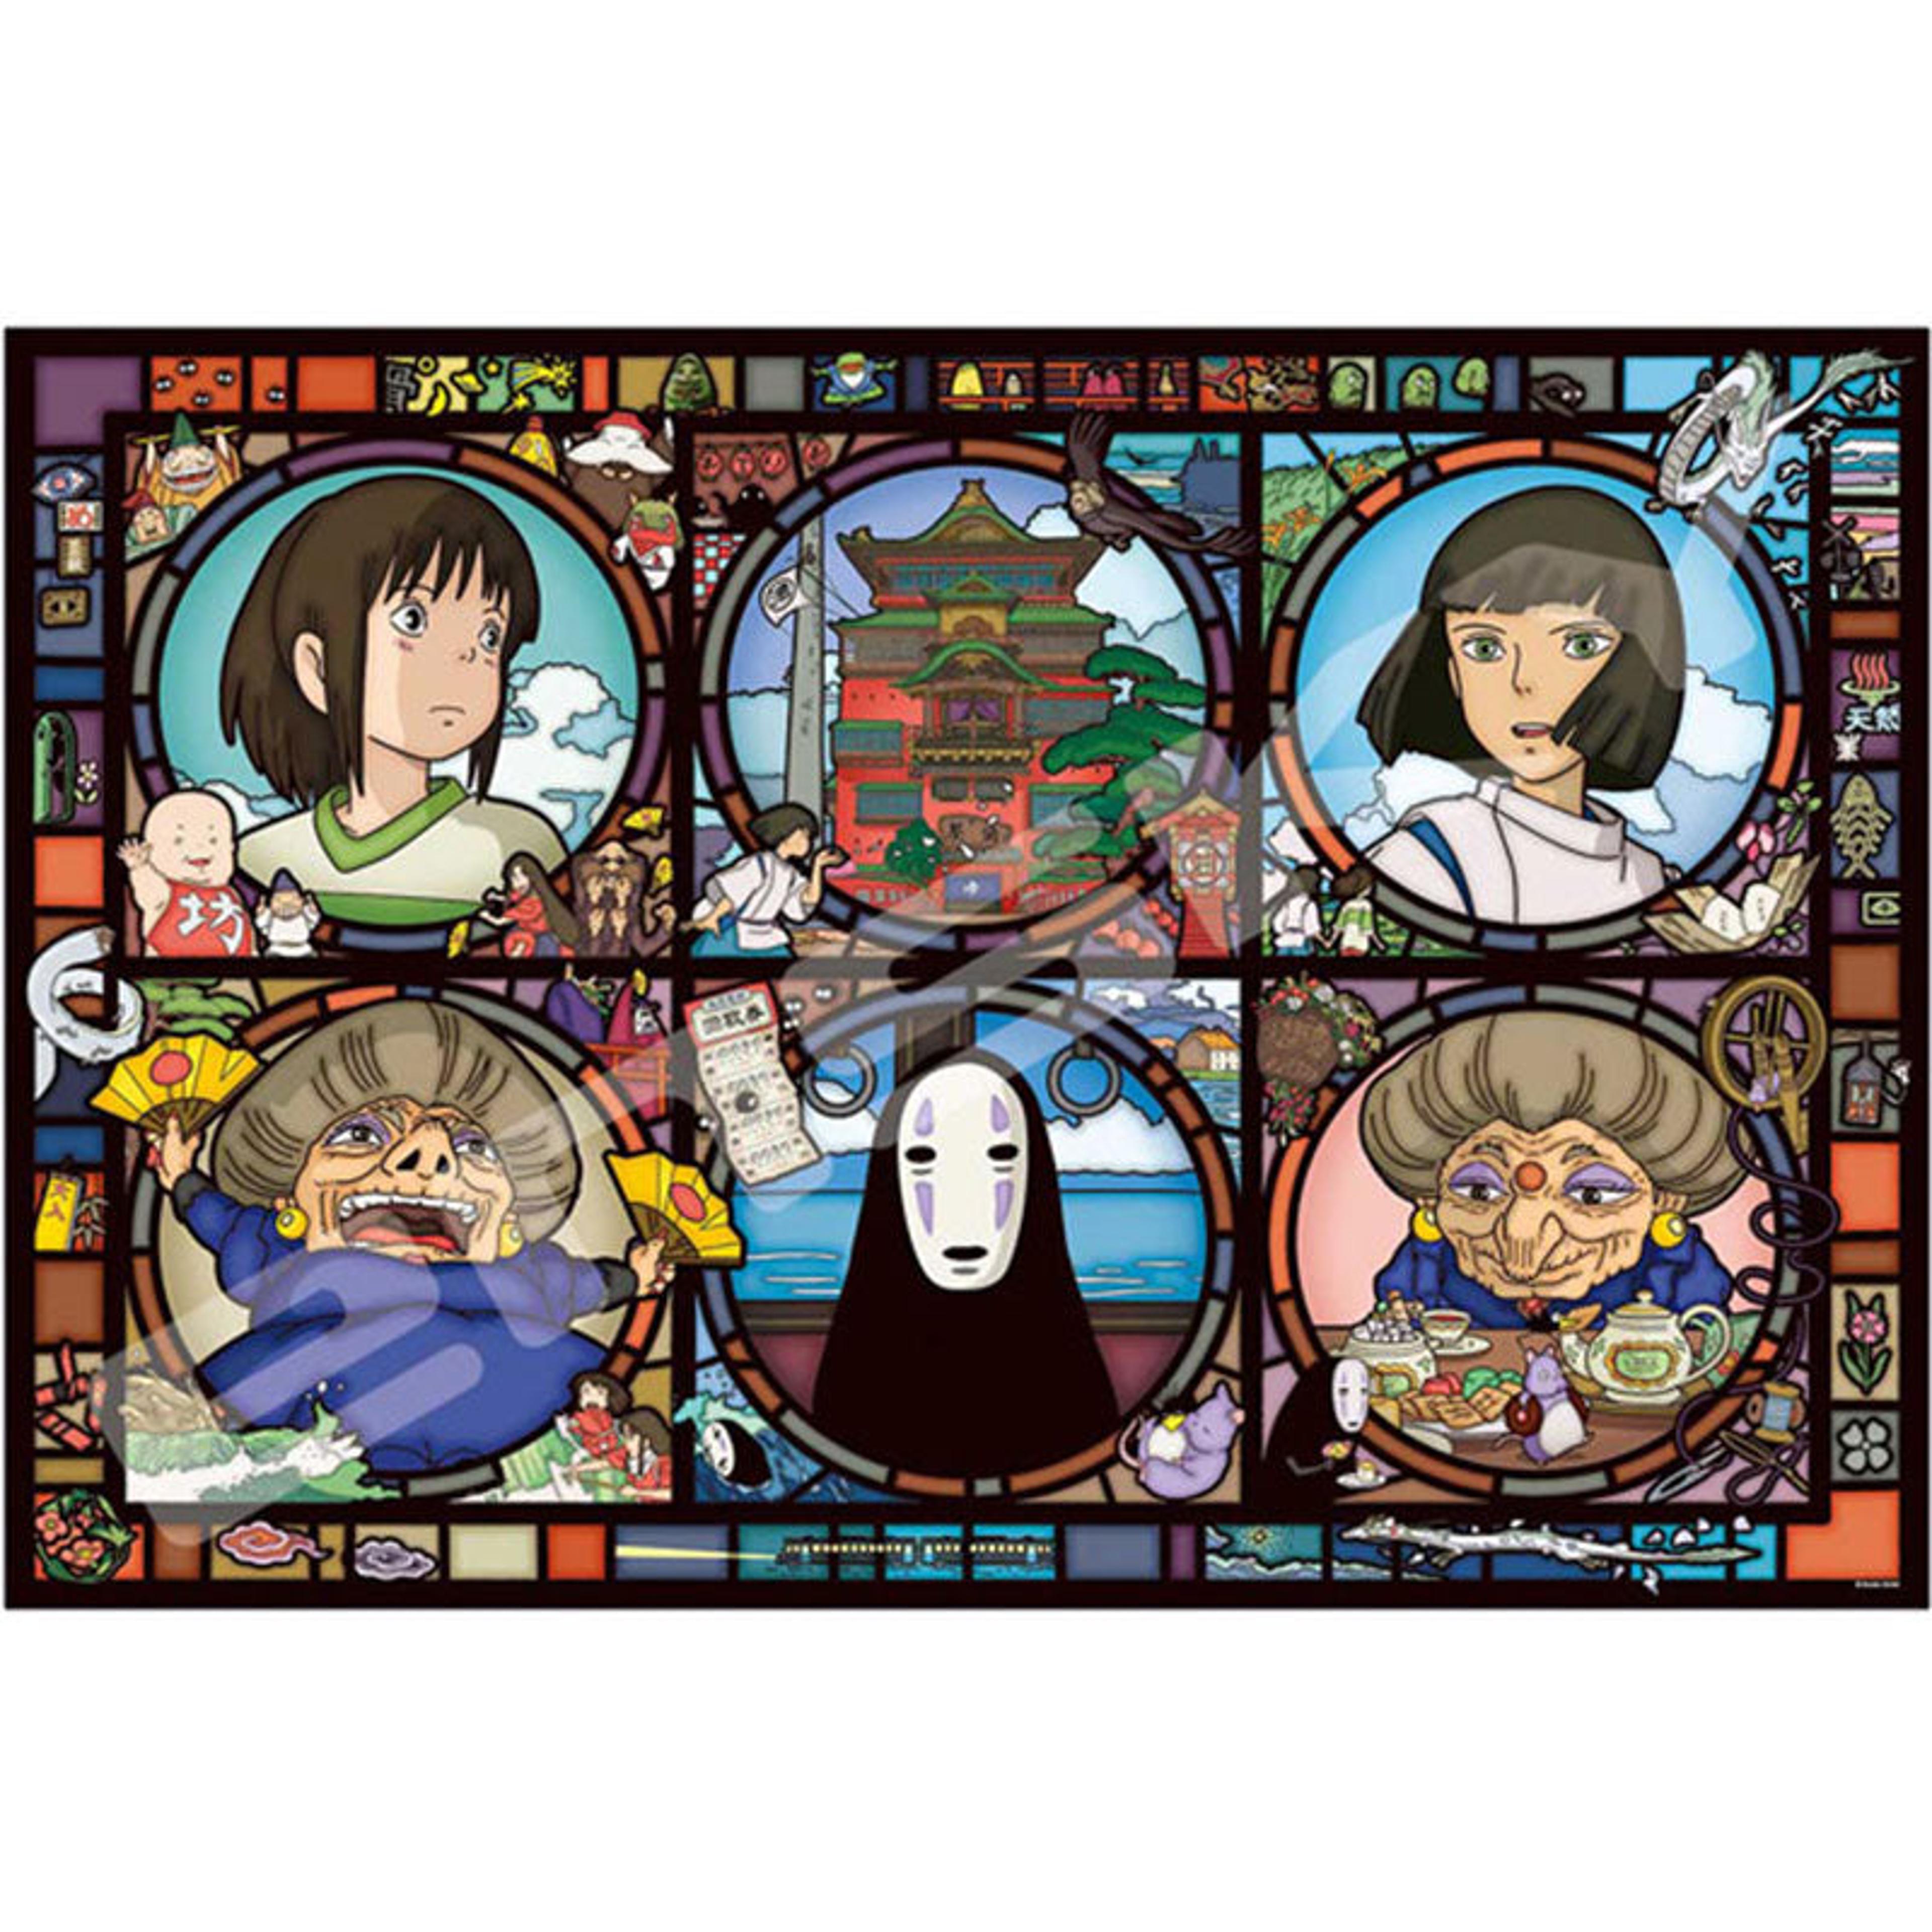 Alternate View 1 of Spirited Away Mysterious Town Large Art Crystal Puzzle